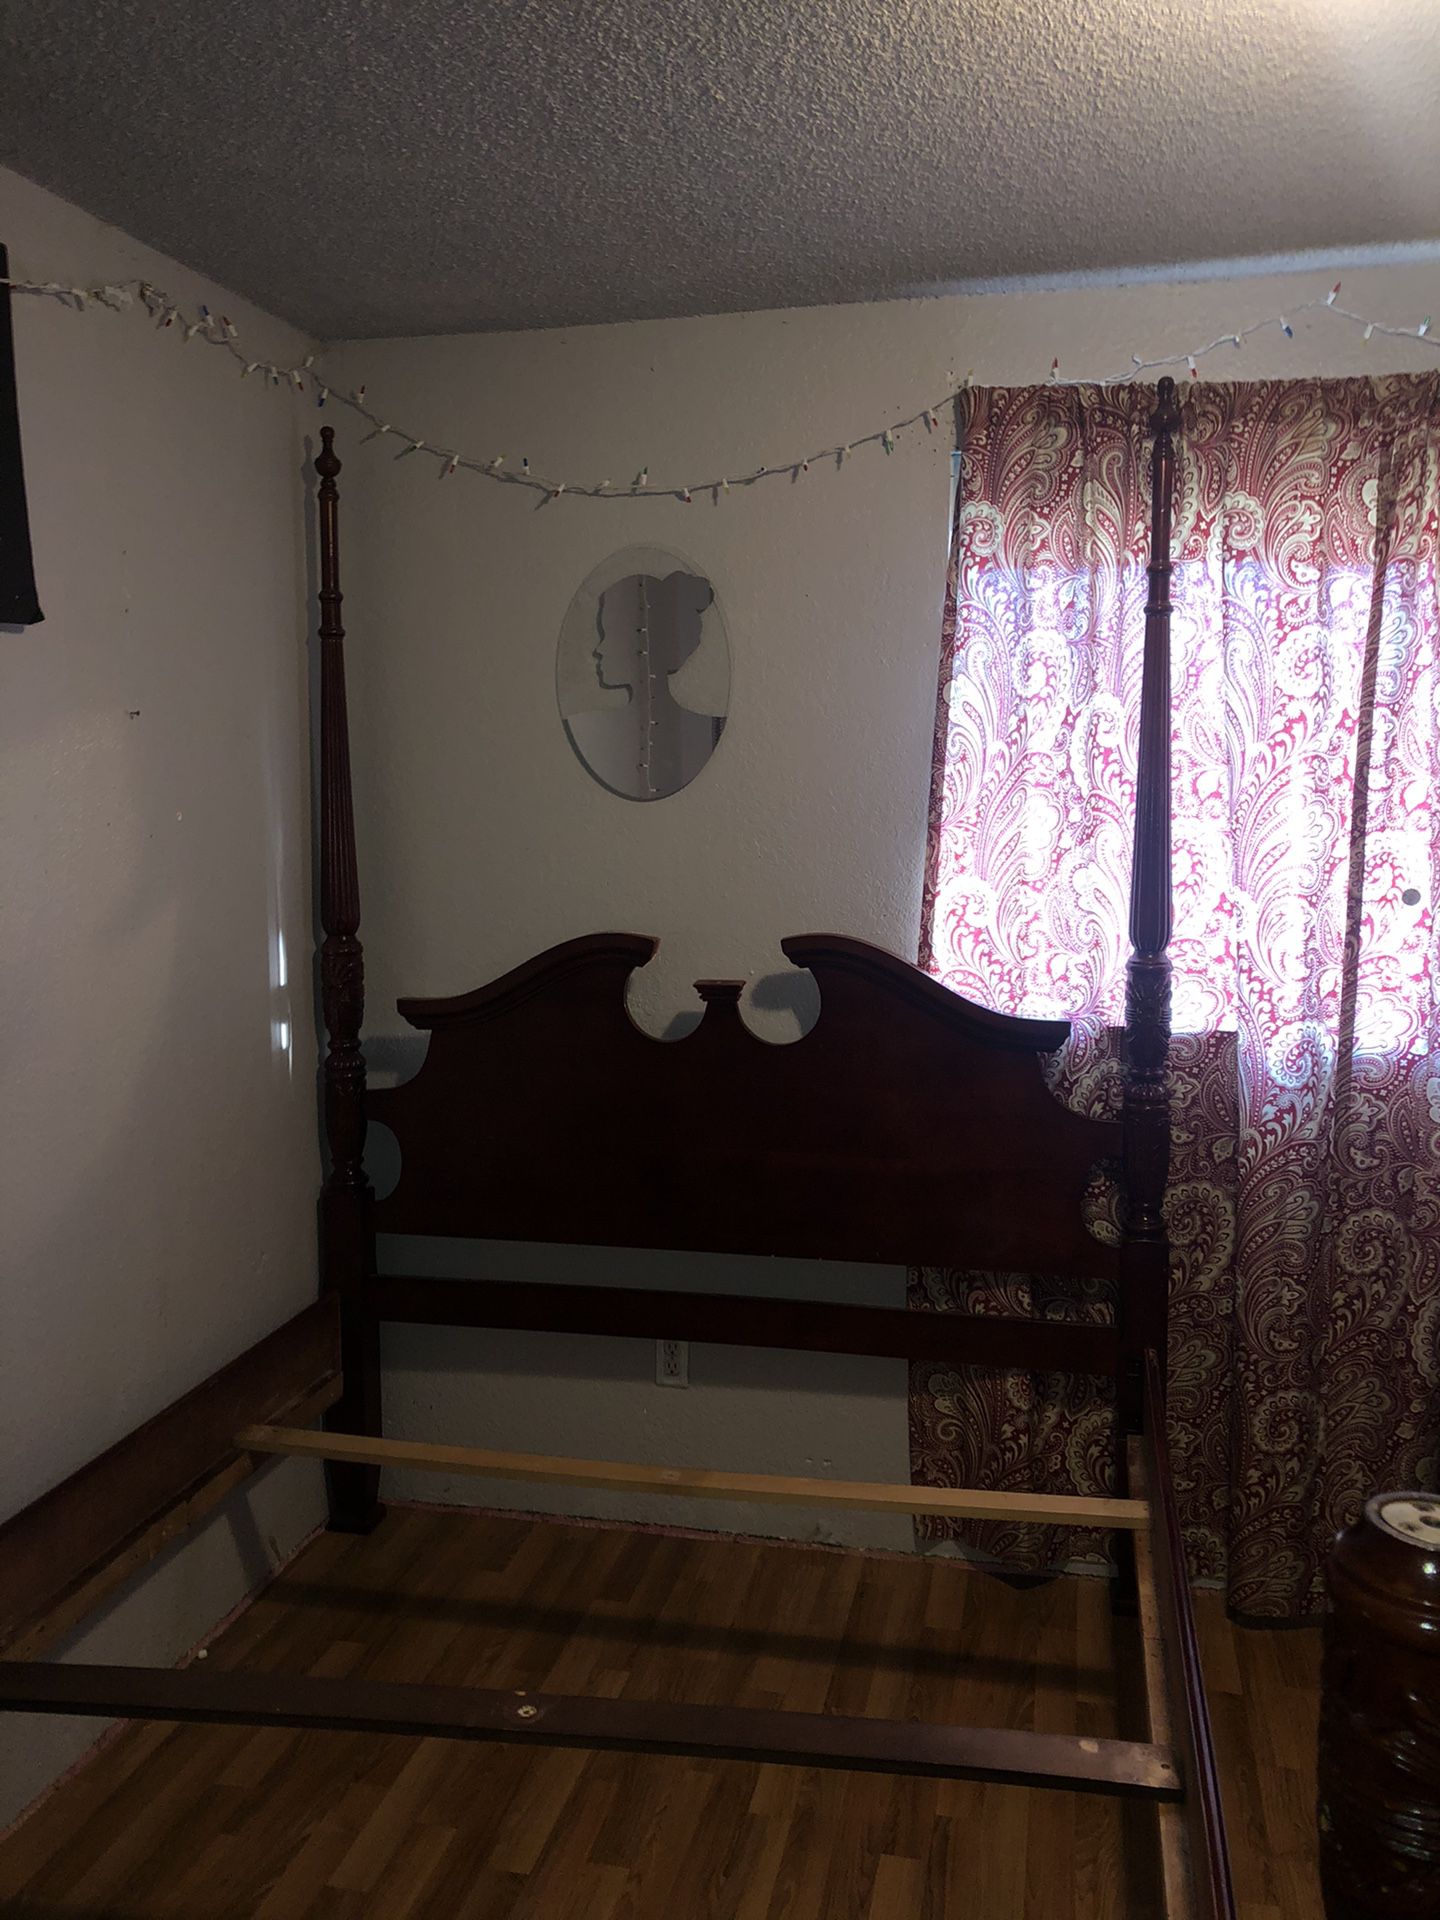 Queen bed frame and dresser